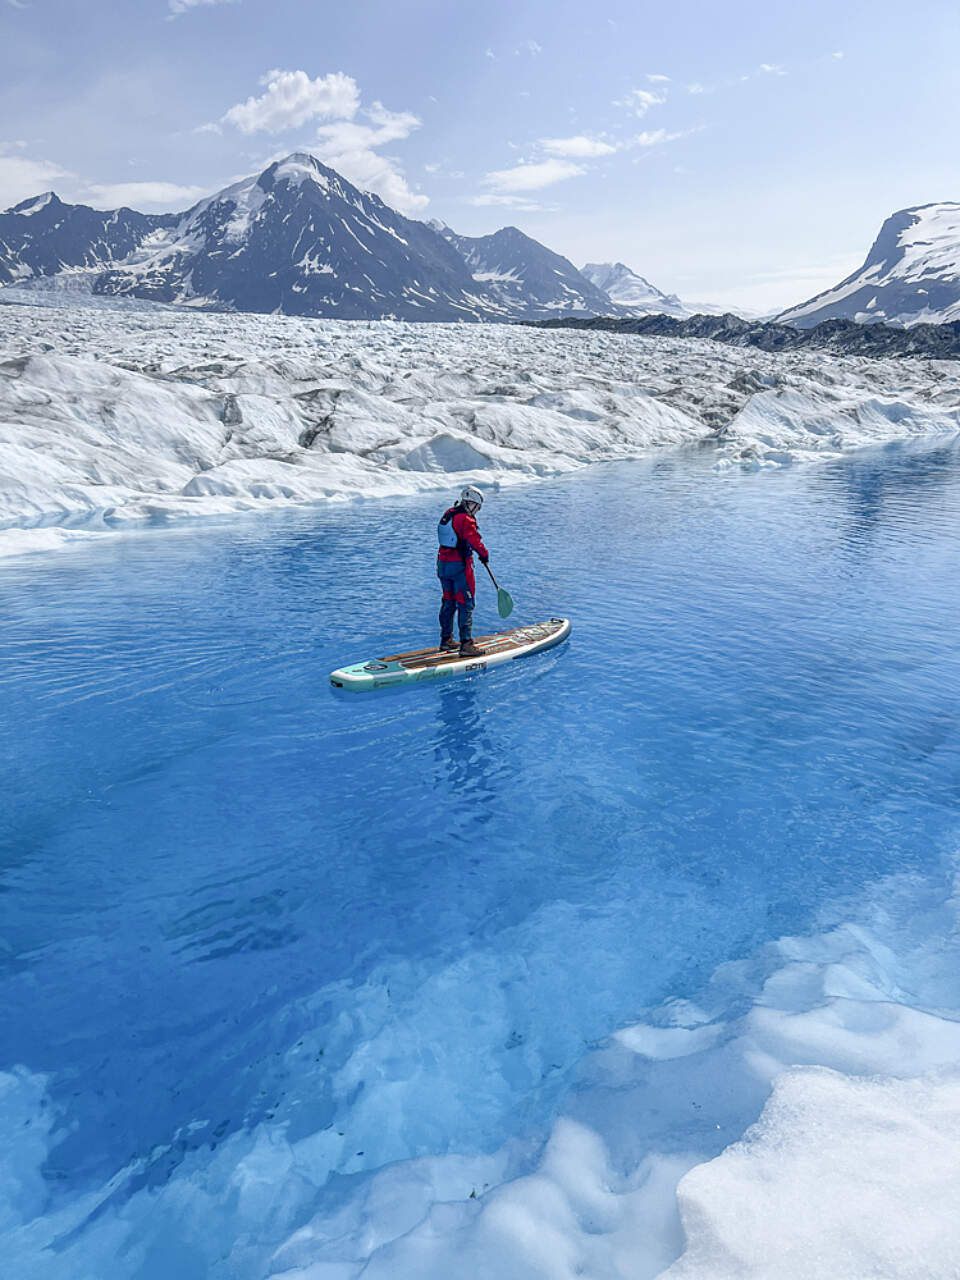 Experience paddleboarding in water as clear as the skies with Alaska Helicopter Tours